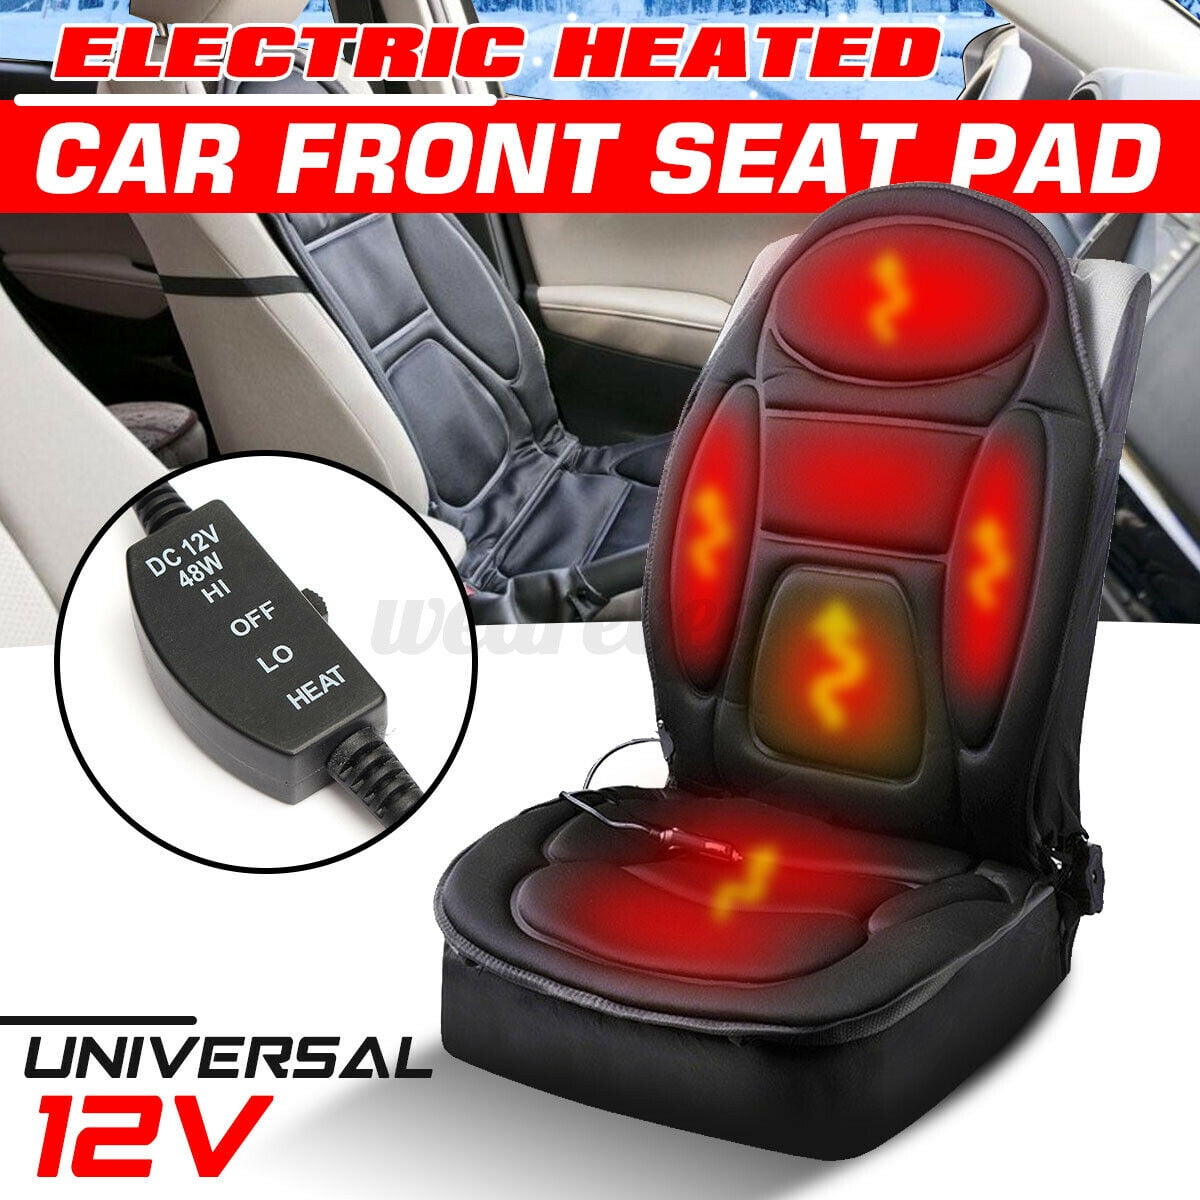 Seat Heater, Longer Service Life Not Easily Break Heated Seat Kit, Reliable  For Car Truck Vehicle Travel